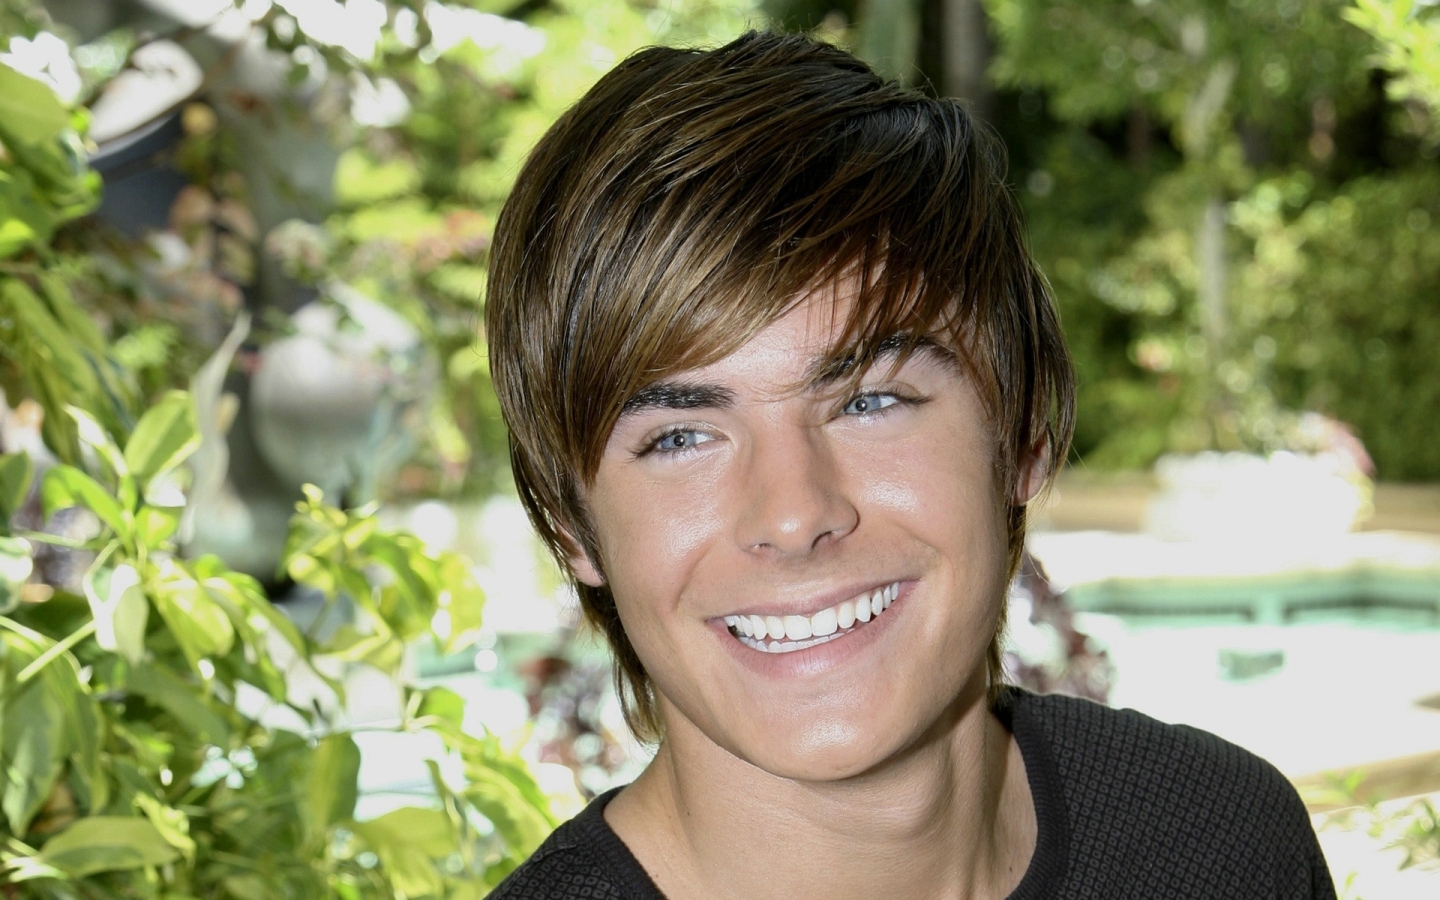 Zac Efron Smile for 1440 x 900 widescreen resolution